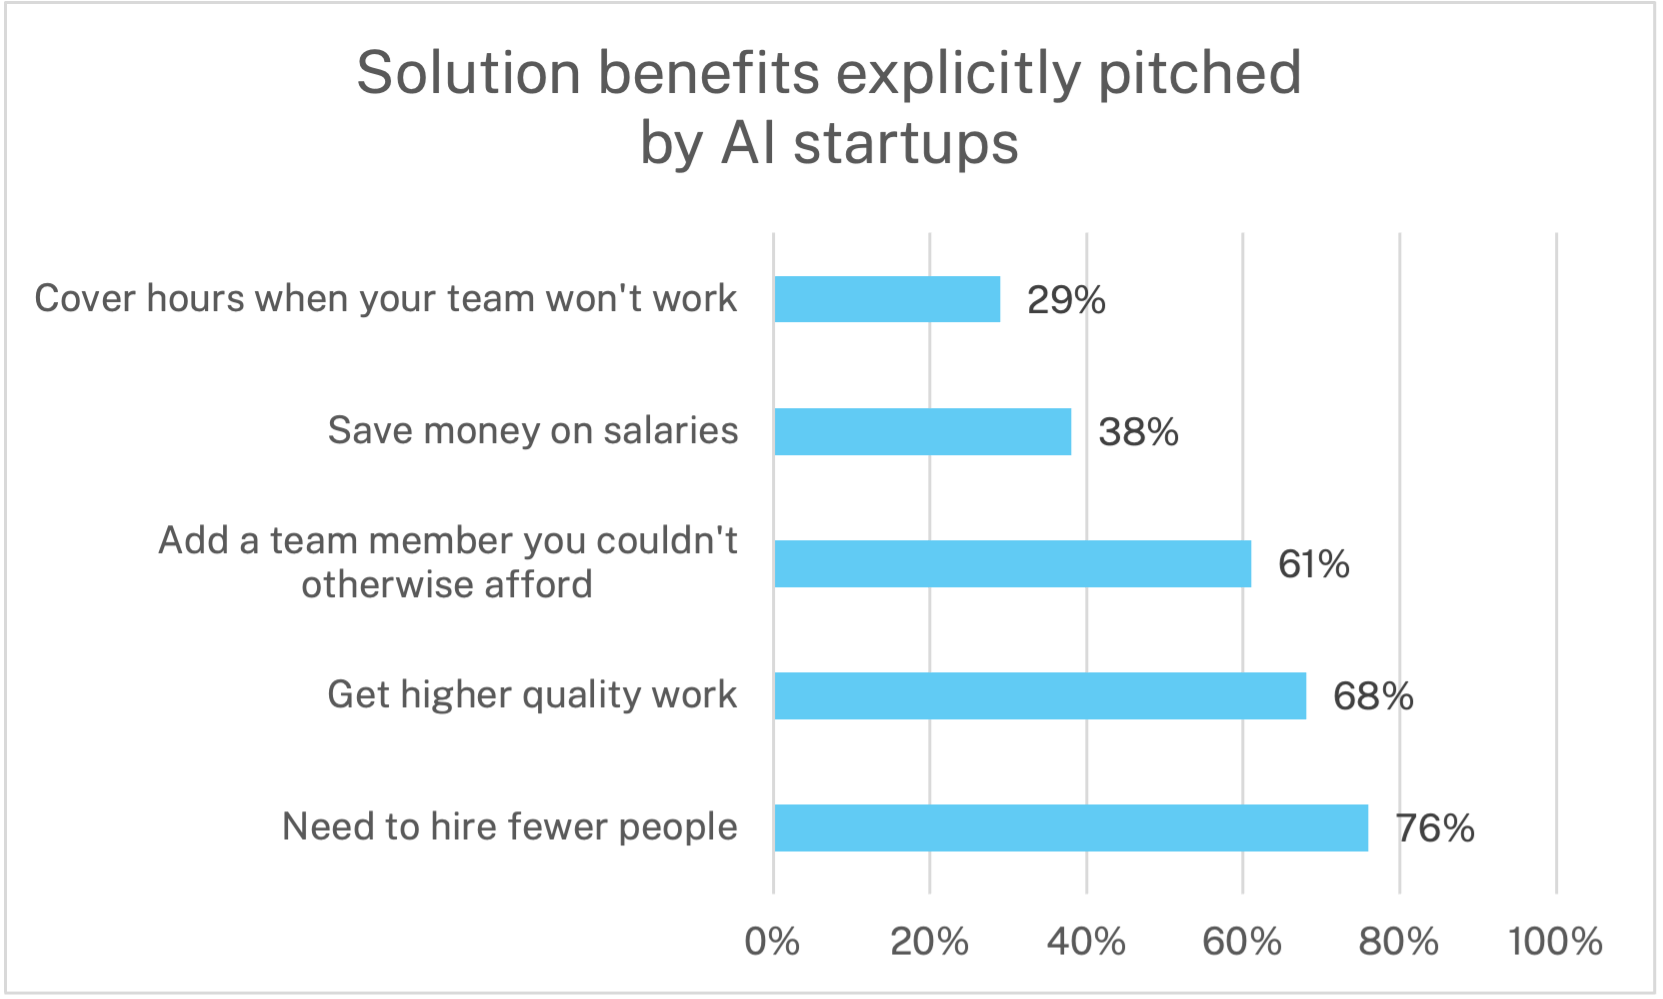 chart showing solution benefits pitched by AI startups. 76% pitching "need to hire fewer people" if you use their solution